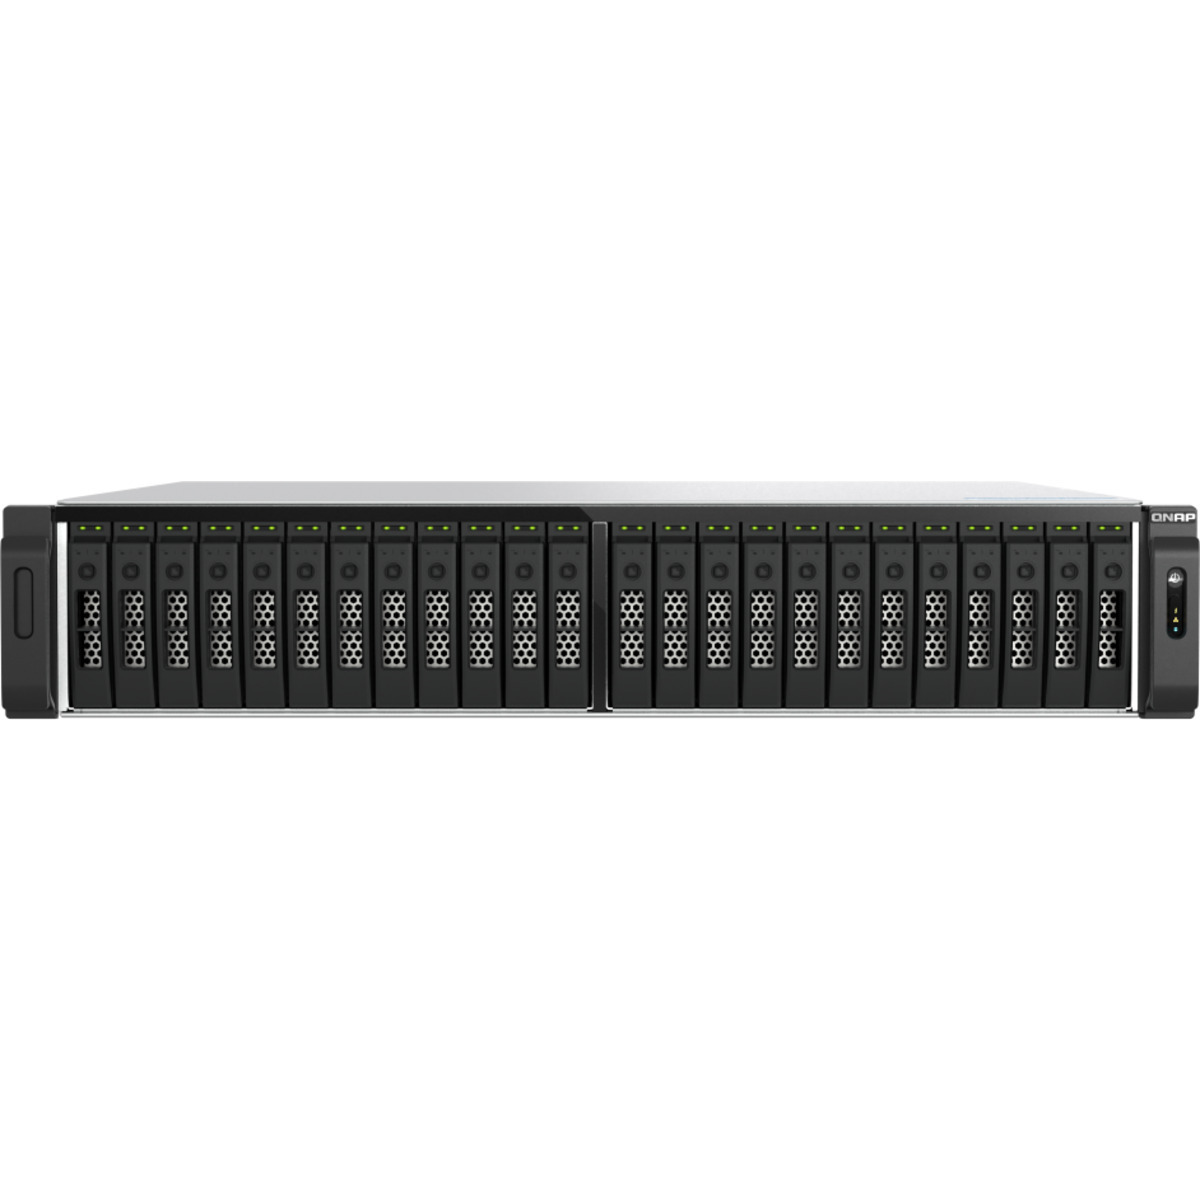 QNAP TS-h3077AFU Ryzen 5 All-Flash ZFS 25tb 30-Bay RackMount Large Business / Enterprise NAS - Network Attached Storage Device 25x1tb Western Digital Red SA500 WDS100T1R0A 2.5 560/530MB/s SATA 6Gb/s SSD NAS Class Drives Installed - Burn-In Tested TS-h3077AFU Ryzen 5 All-Flash ZFS